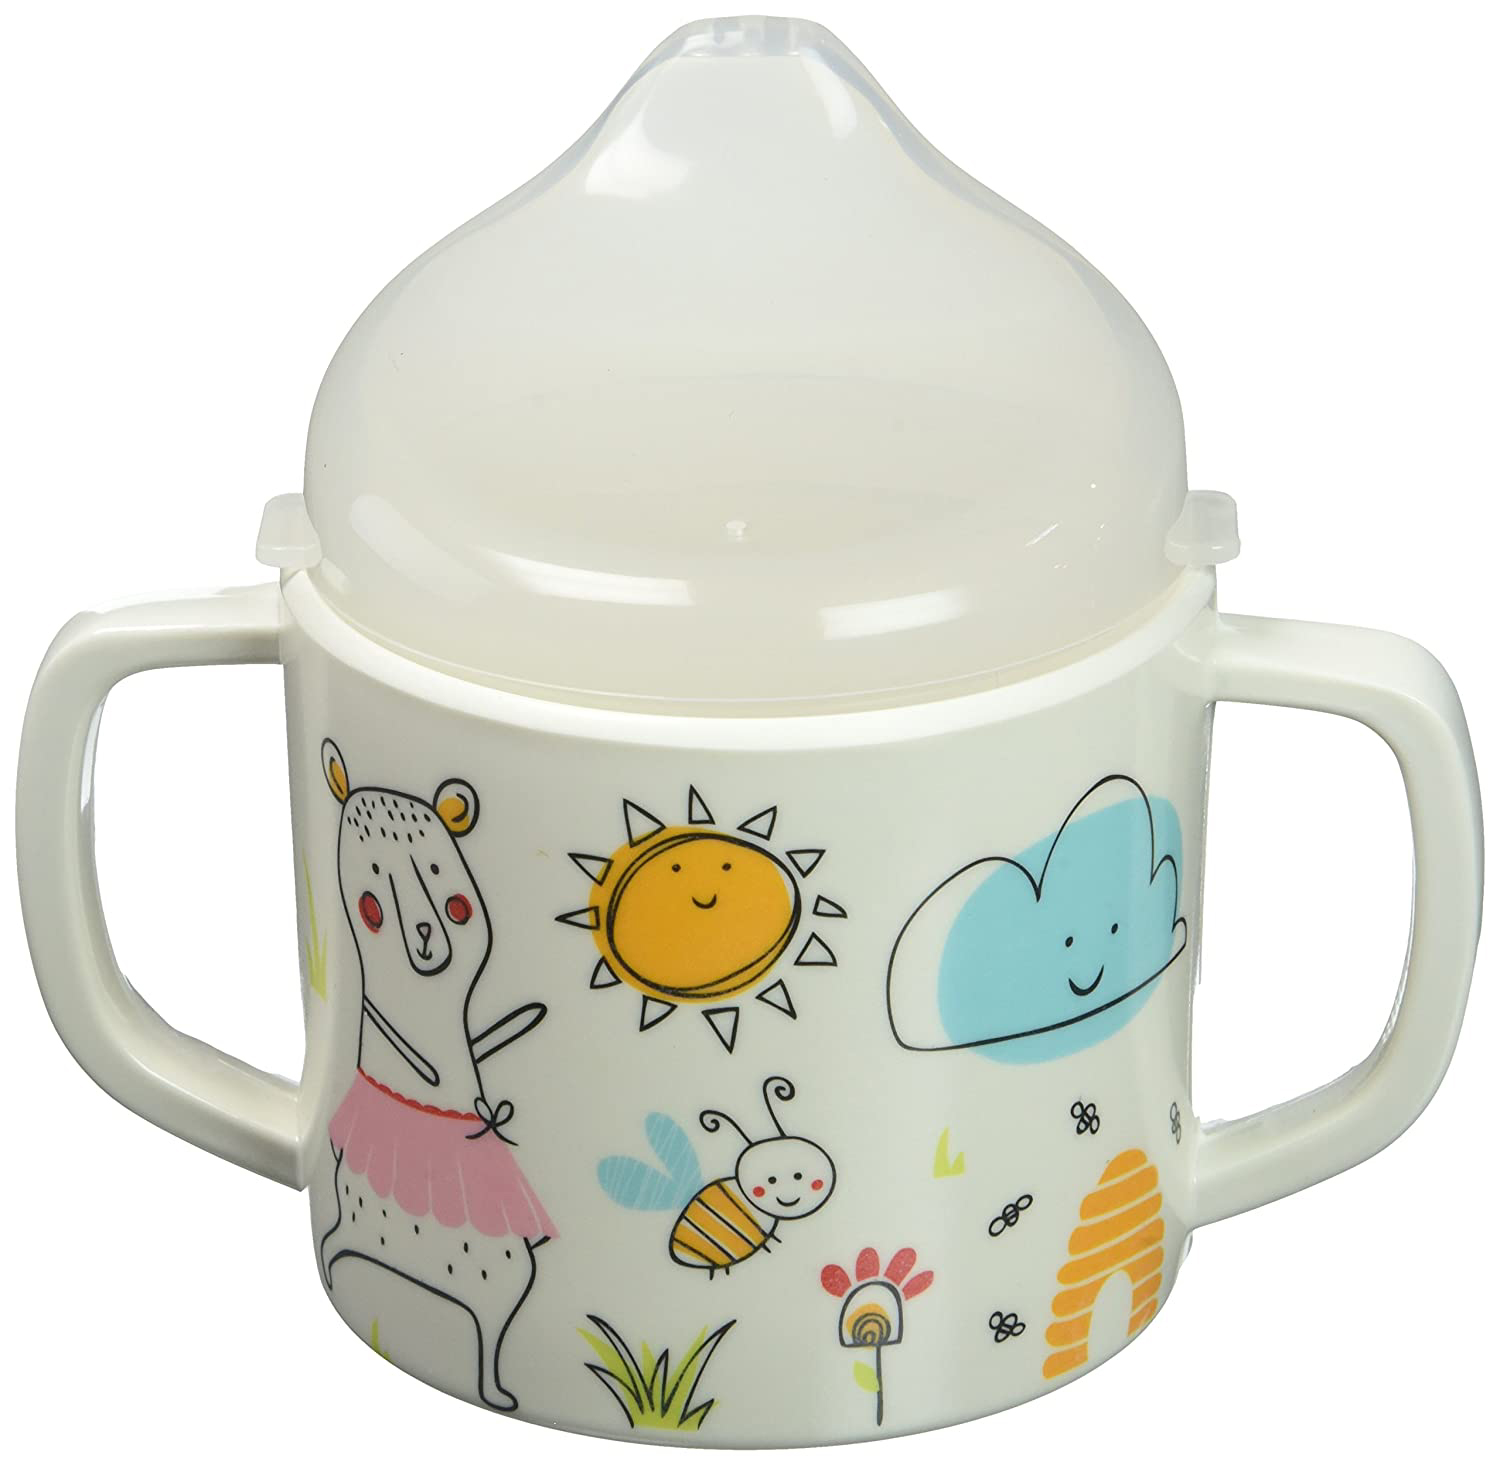 Clementine the Bear Sippy Cup 1